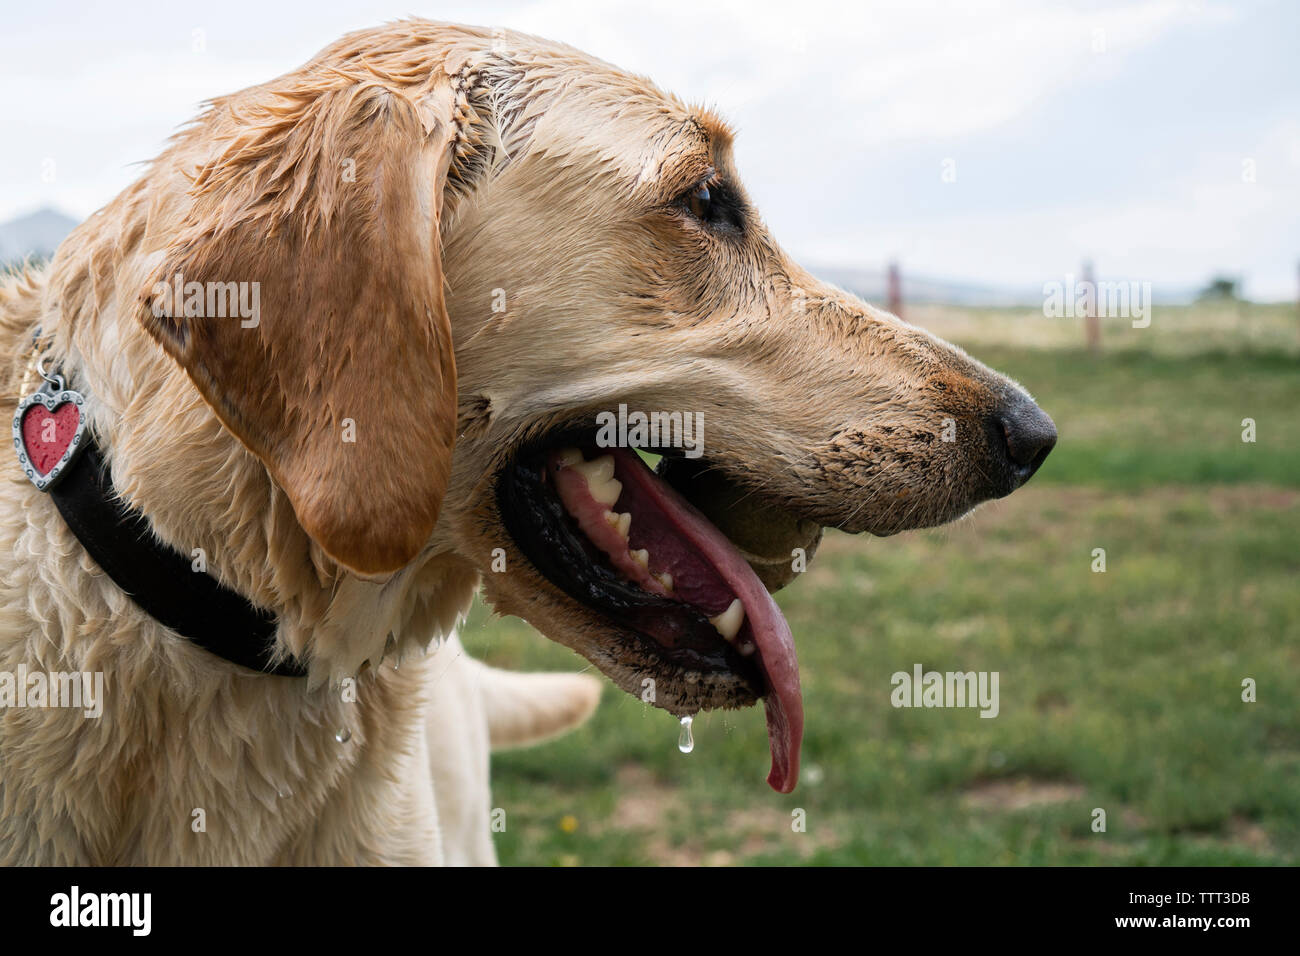 Close-up of wet Labrador Retriever with ball in mouth standing on grassy field against sky Stock Photo